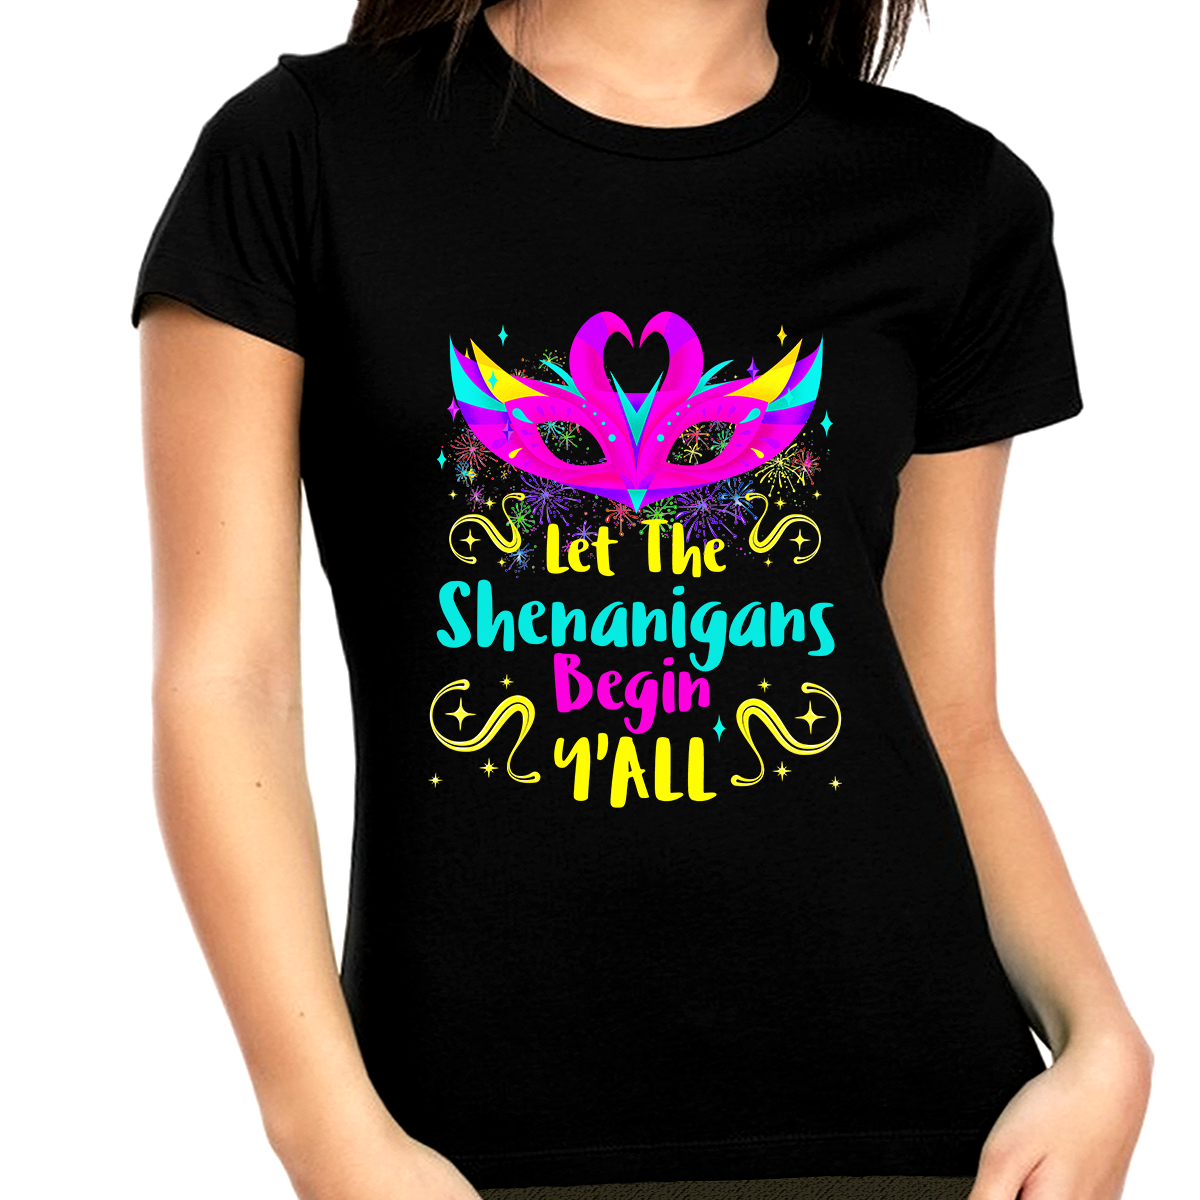 Funny Mardi Gras Shirts for Women Plus Size Let The Shenanigans Begin Yall Cute Mardi Gras Outfit for Women